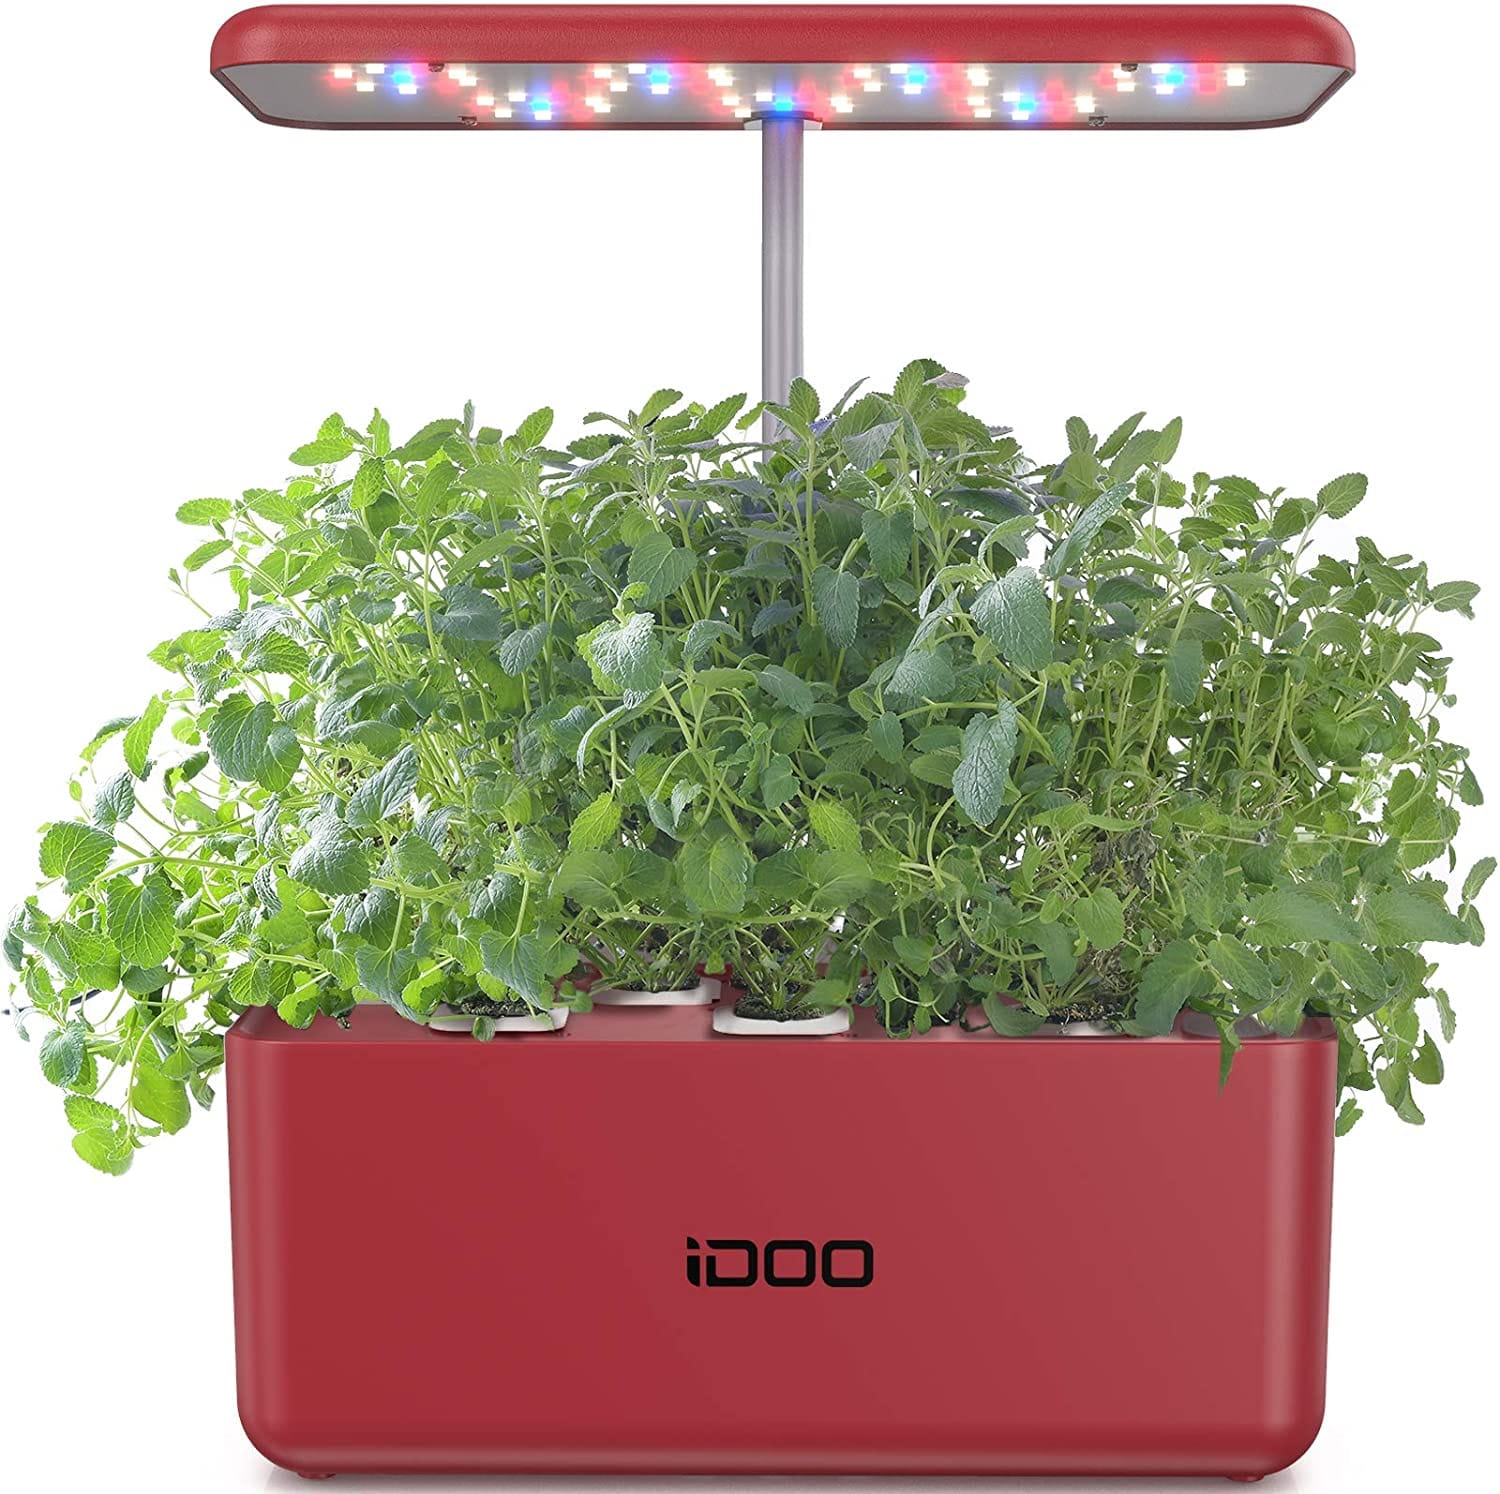 iDOO Hydroponics Growing System, Indoor Garden Starter Kit with LED Grow Light, Automatic Timer Germination Kit, Height Adjustable (7 Pods) 7-Pods White - Smart Tech Shopping